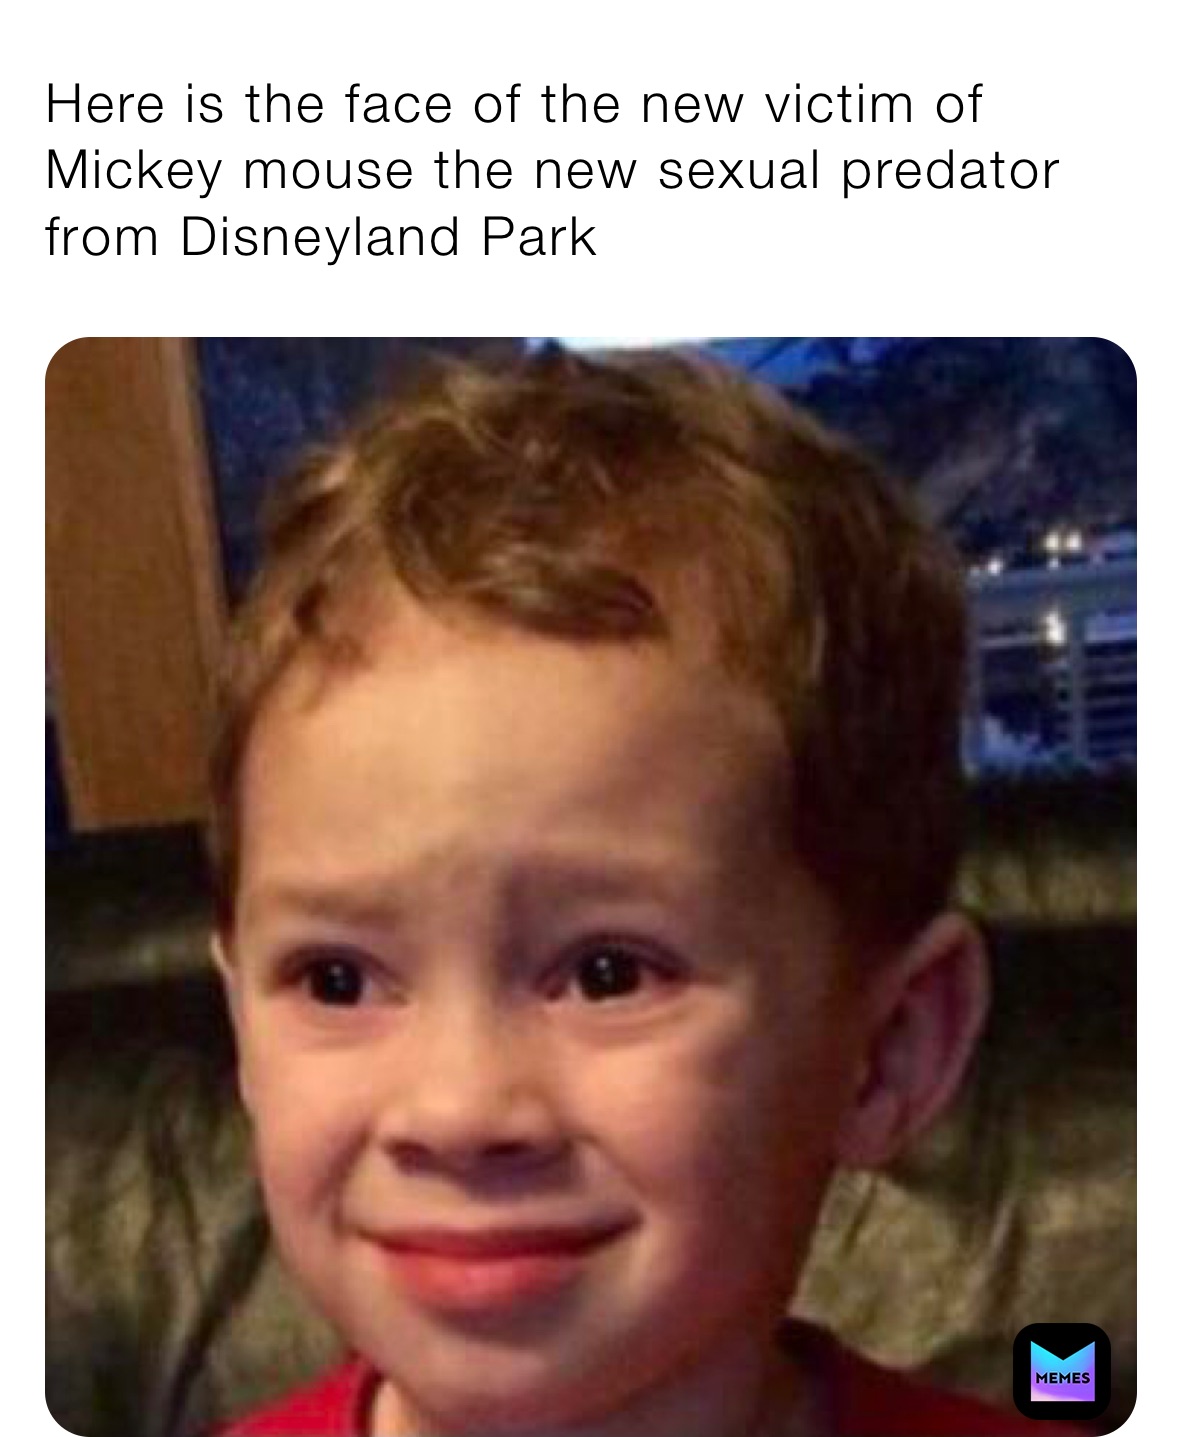 Here is the face of the new victim of Mickey mouse the new sexual predator from Disneyland Park